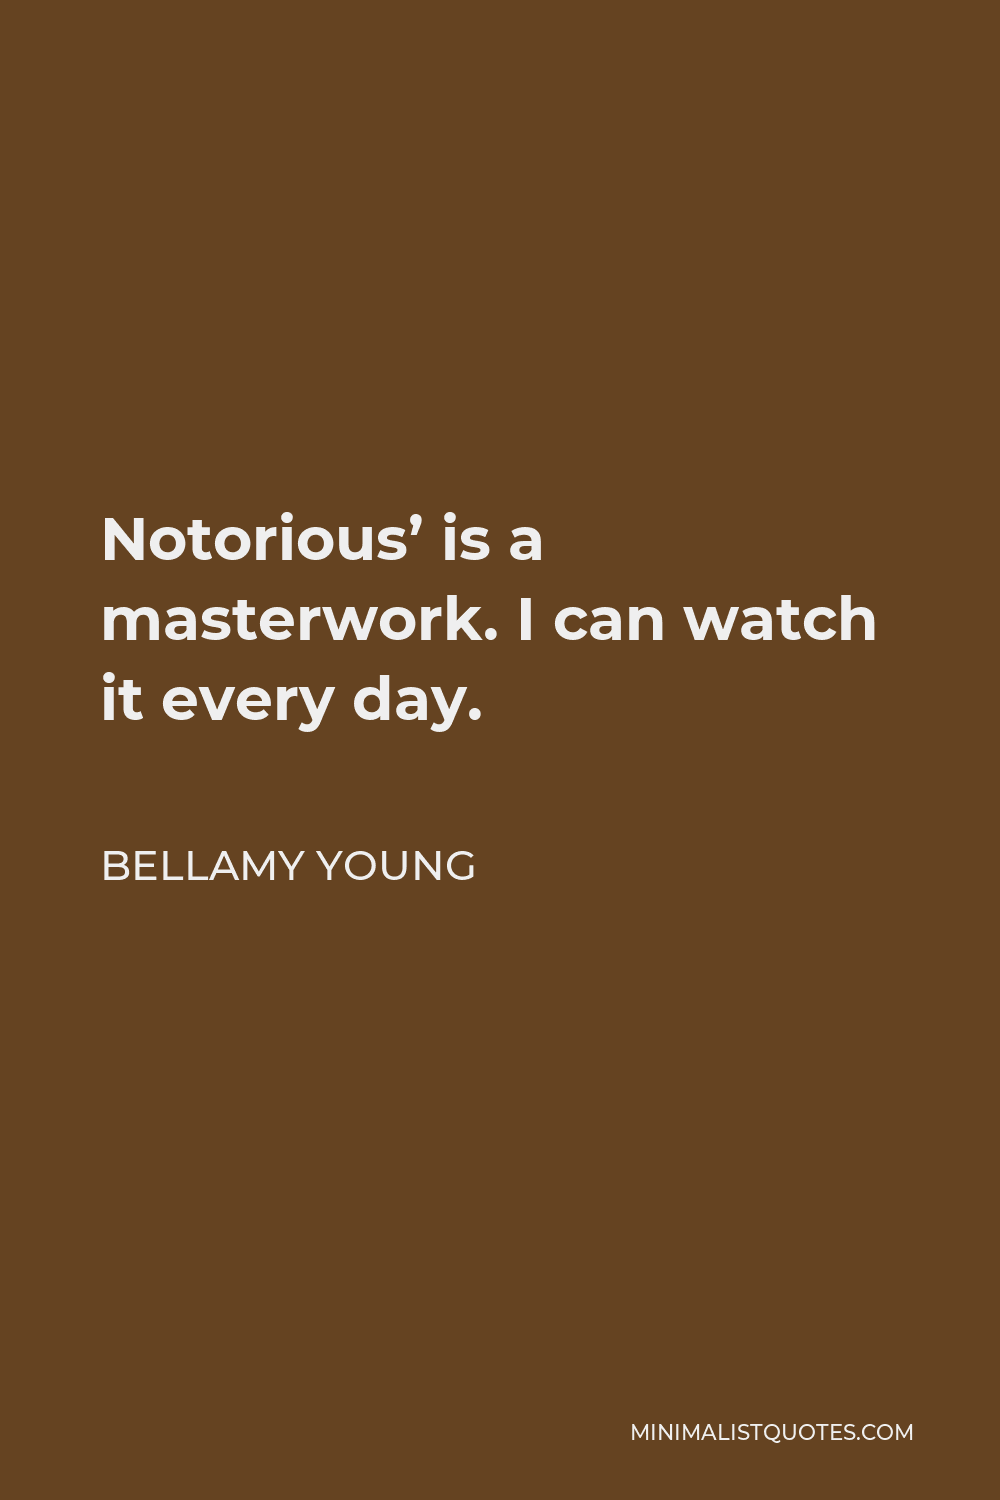 Bellamy Young Quote - Notorious’ is a masterwork. I can watch it every day.